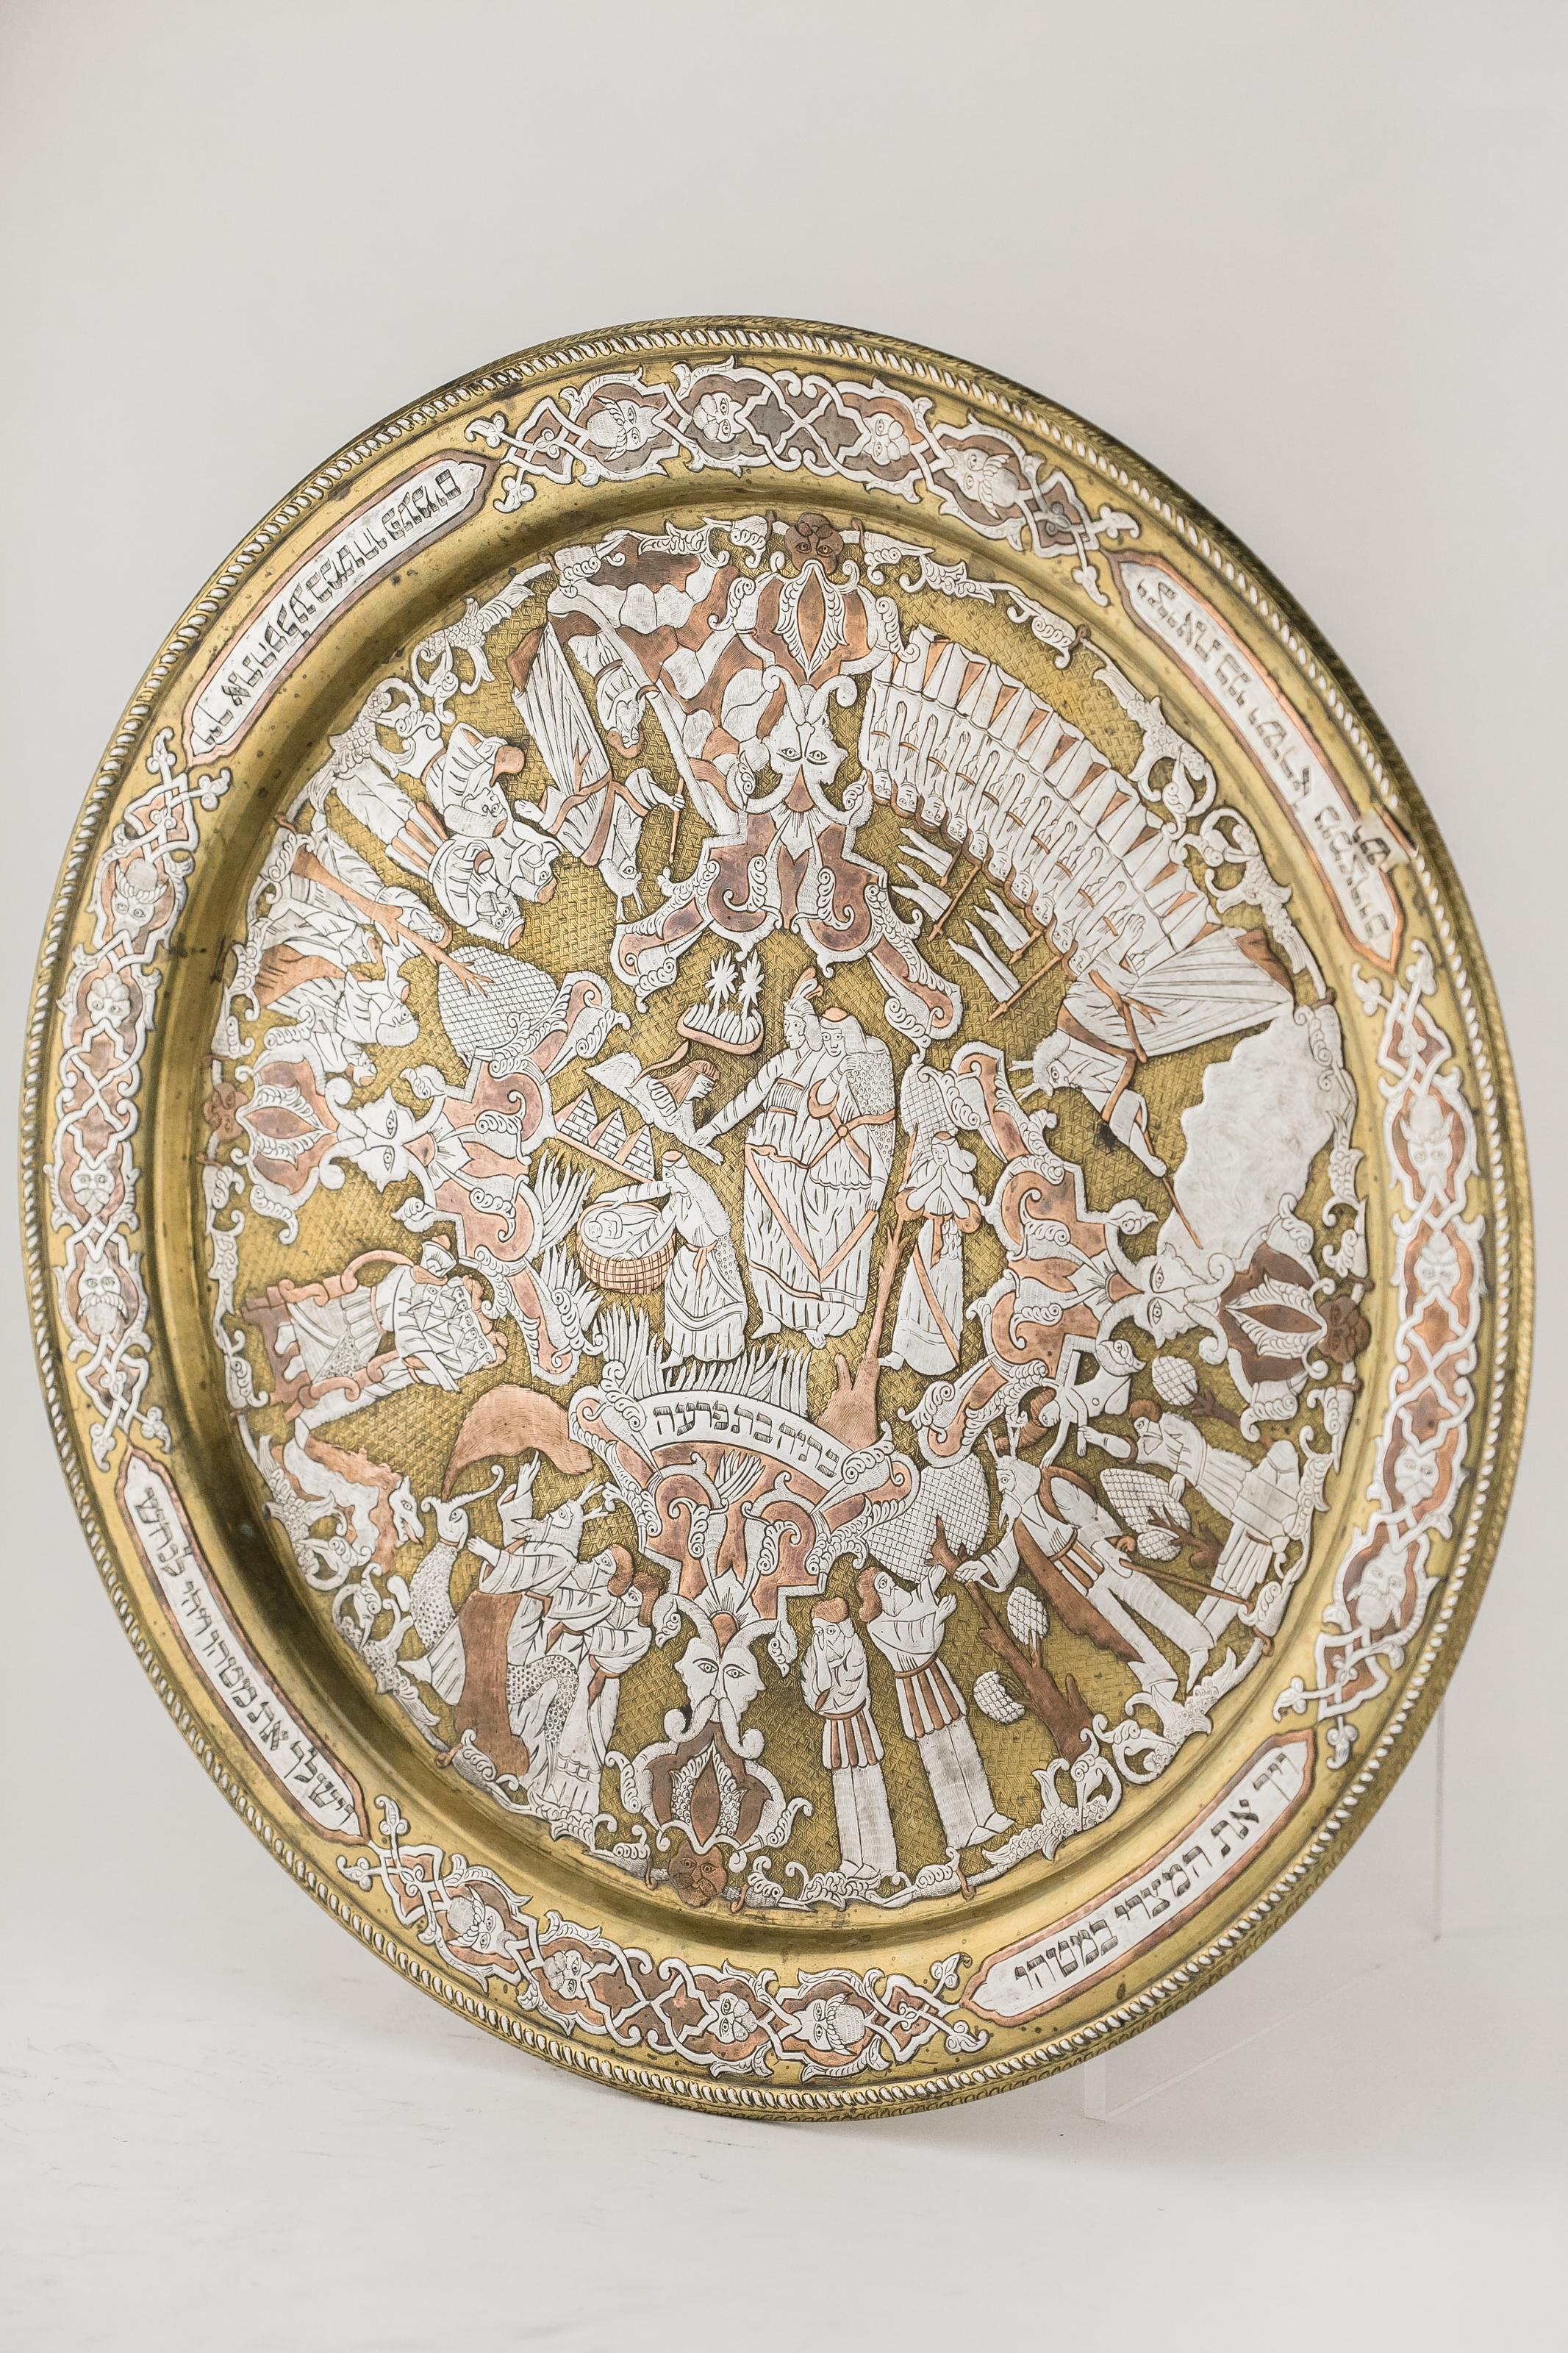 Tray for Passover, silver and copper inlay on brass, Damascus, Syria, late 19th century. 
Unlike other Jewish silver inlaid trays from Syria (known as “Damascene”, as this kind of work was made famous by Jewish artisans in Damascus), this has no